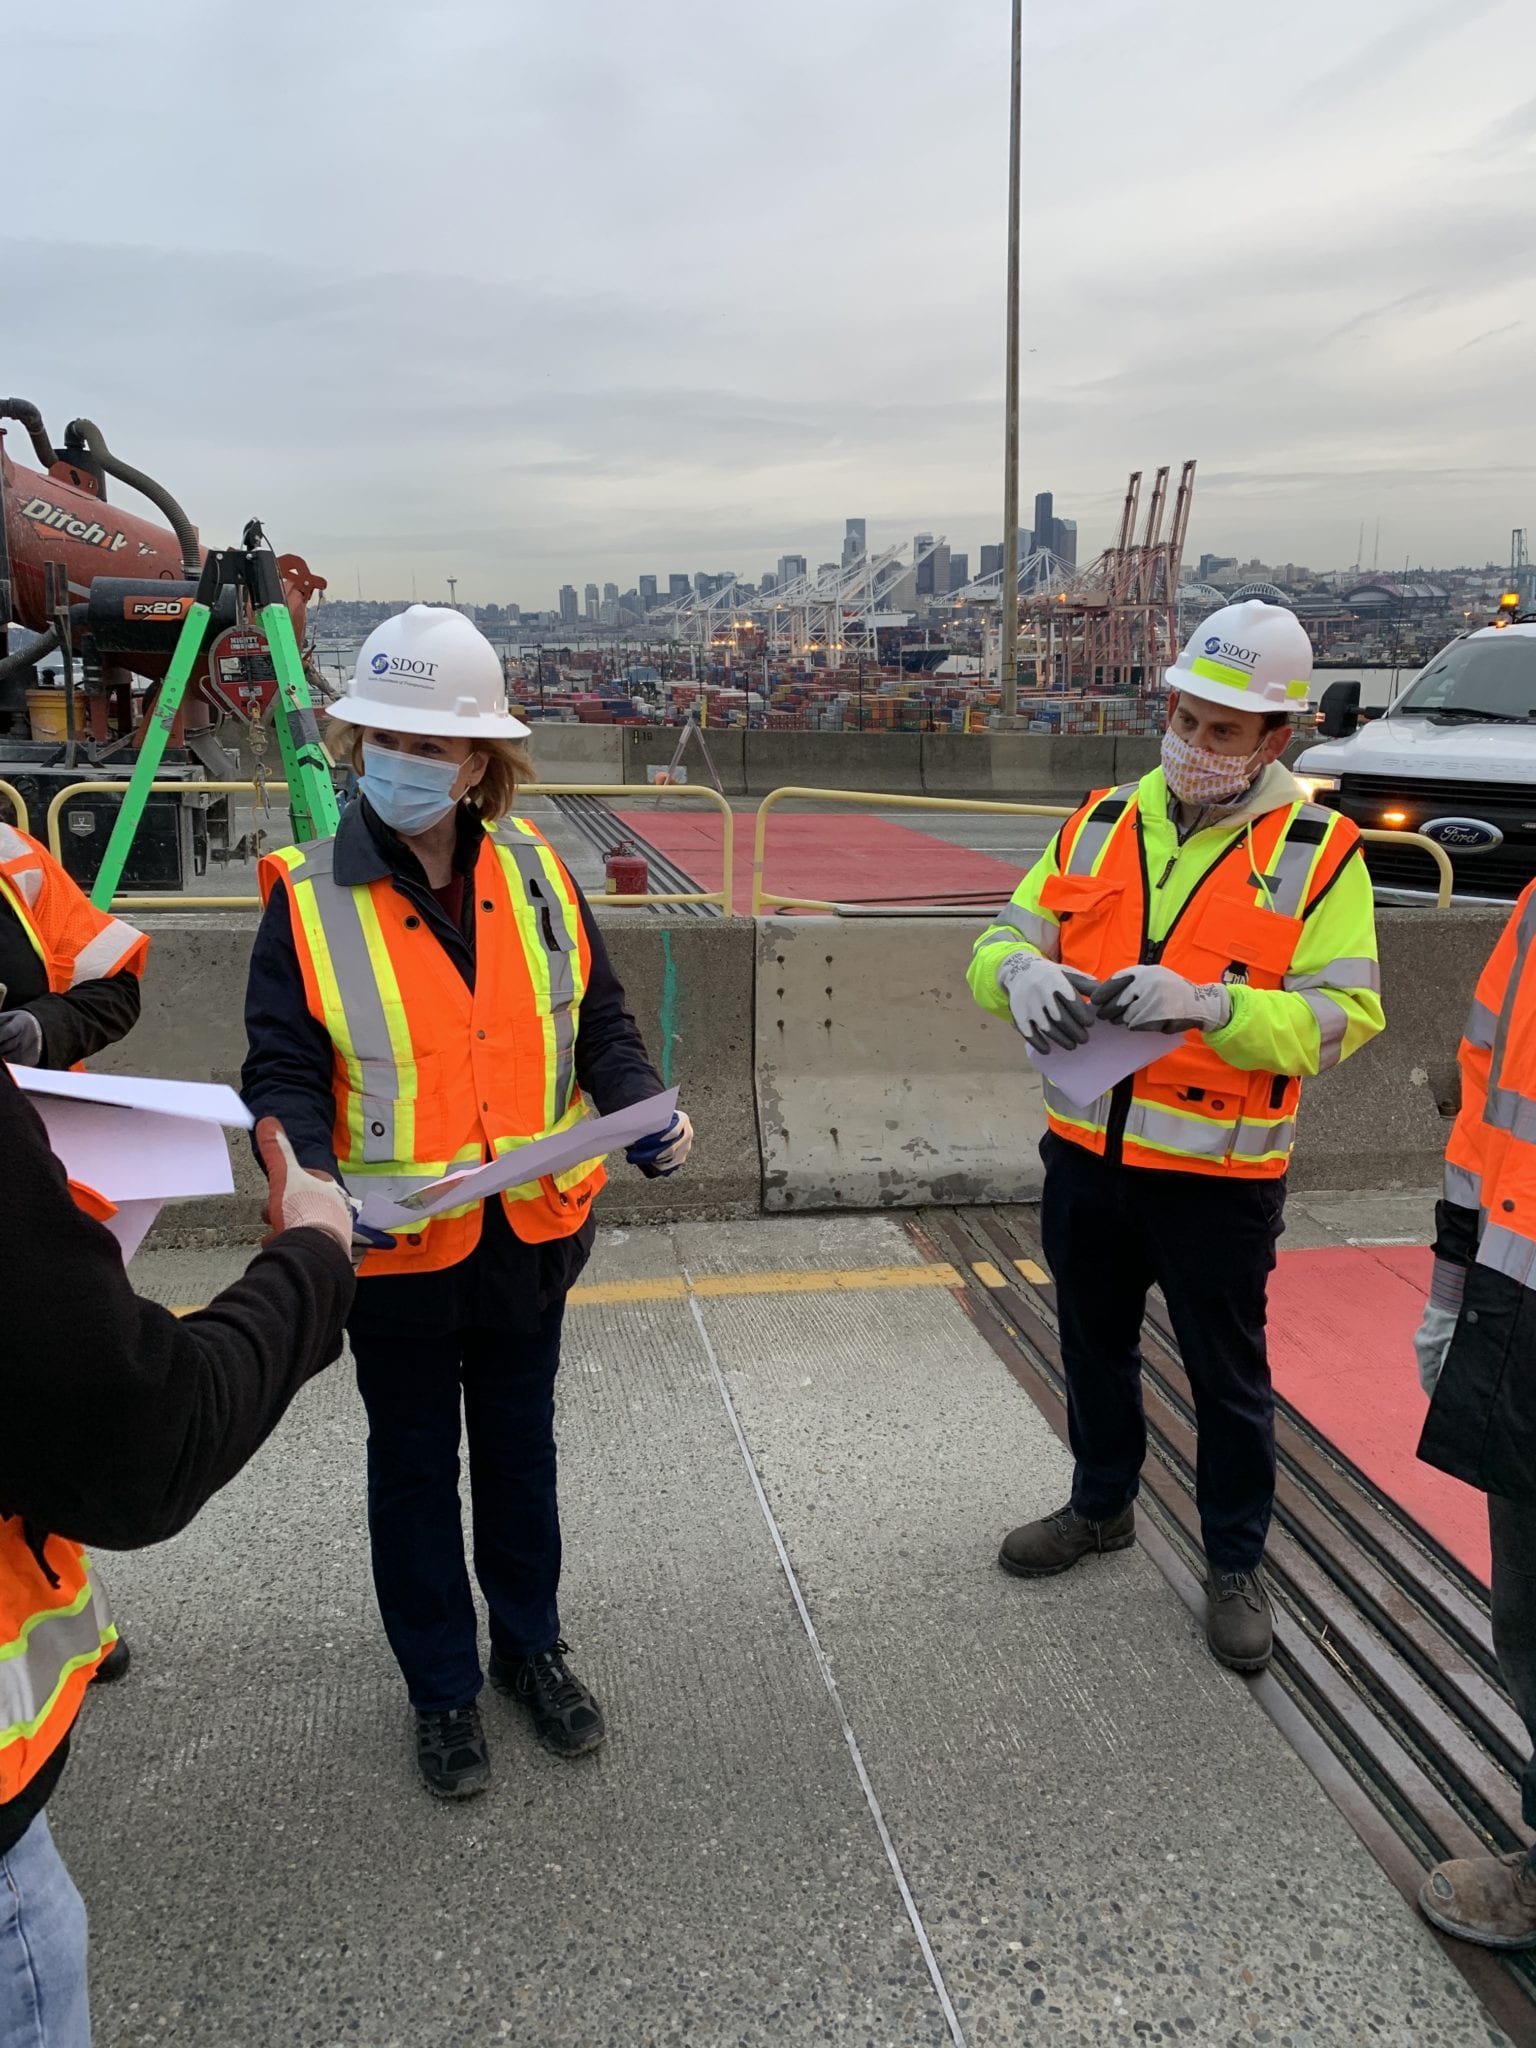 Mayor Durkan visits the West Seattle High-Rise Bridge stabilization site with SDOT Director Sam Zimbabwe and a bridge engineer. The three are looking at paper, standing on the road on the West Seattle Bridge.